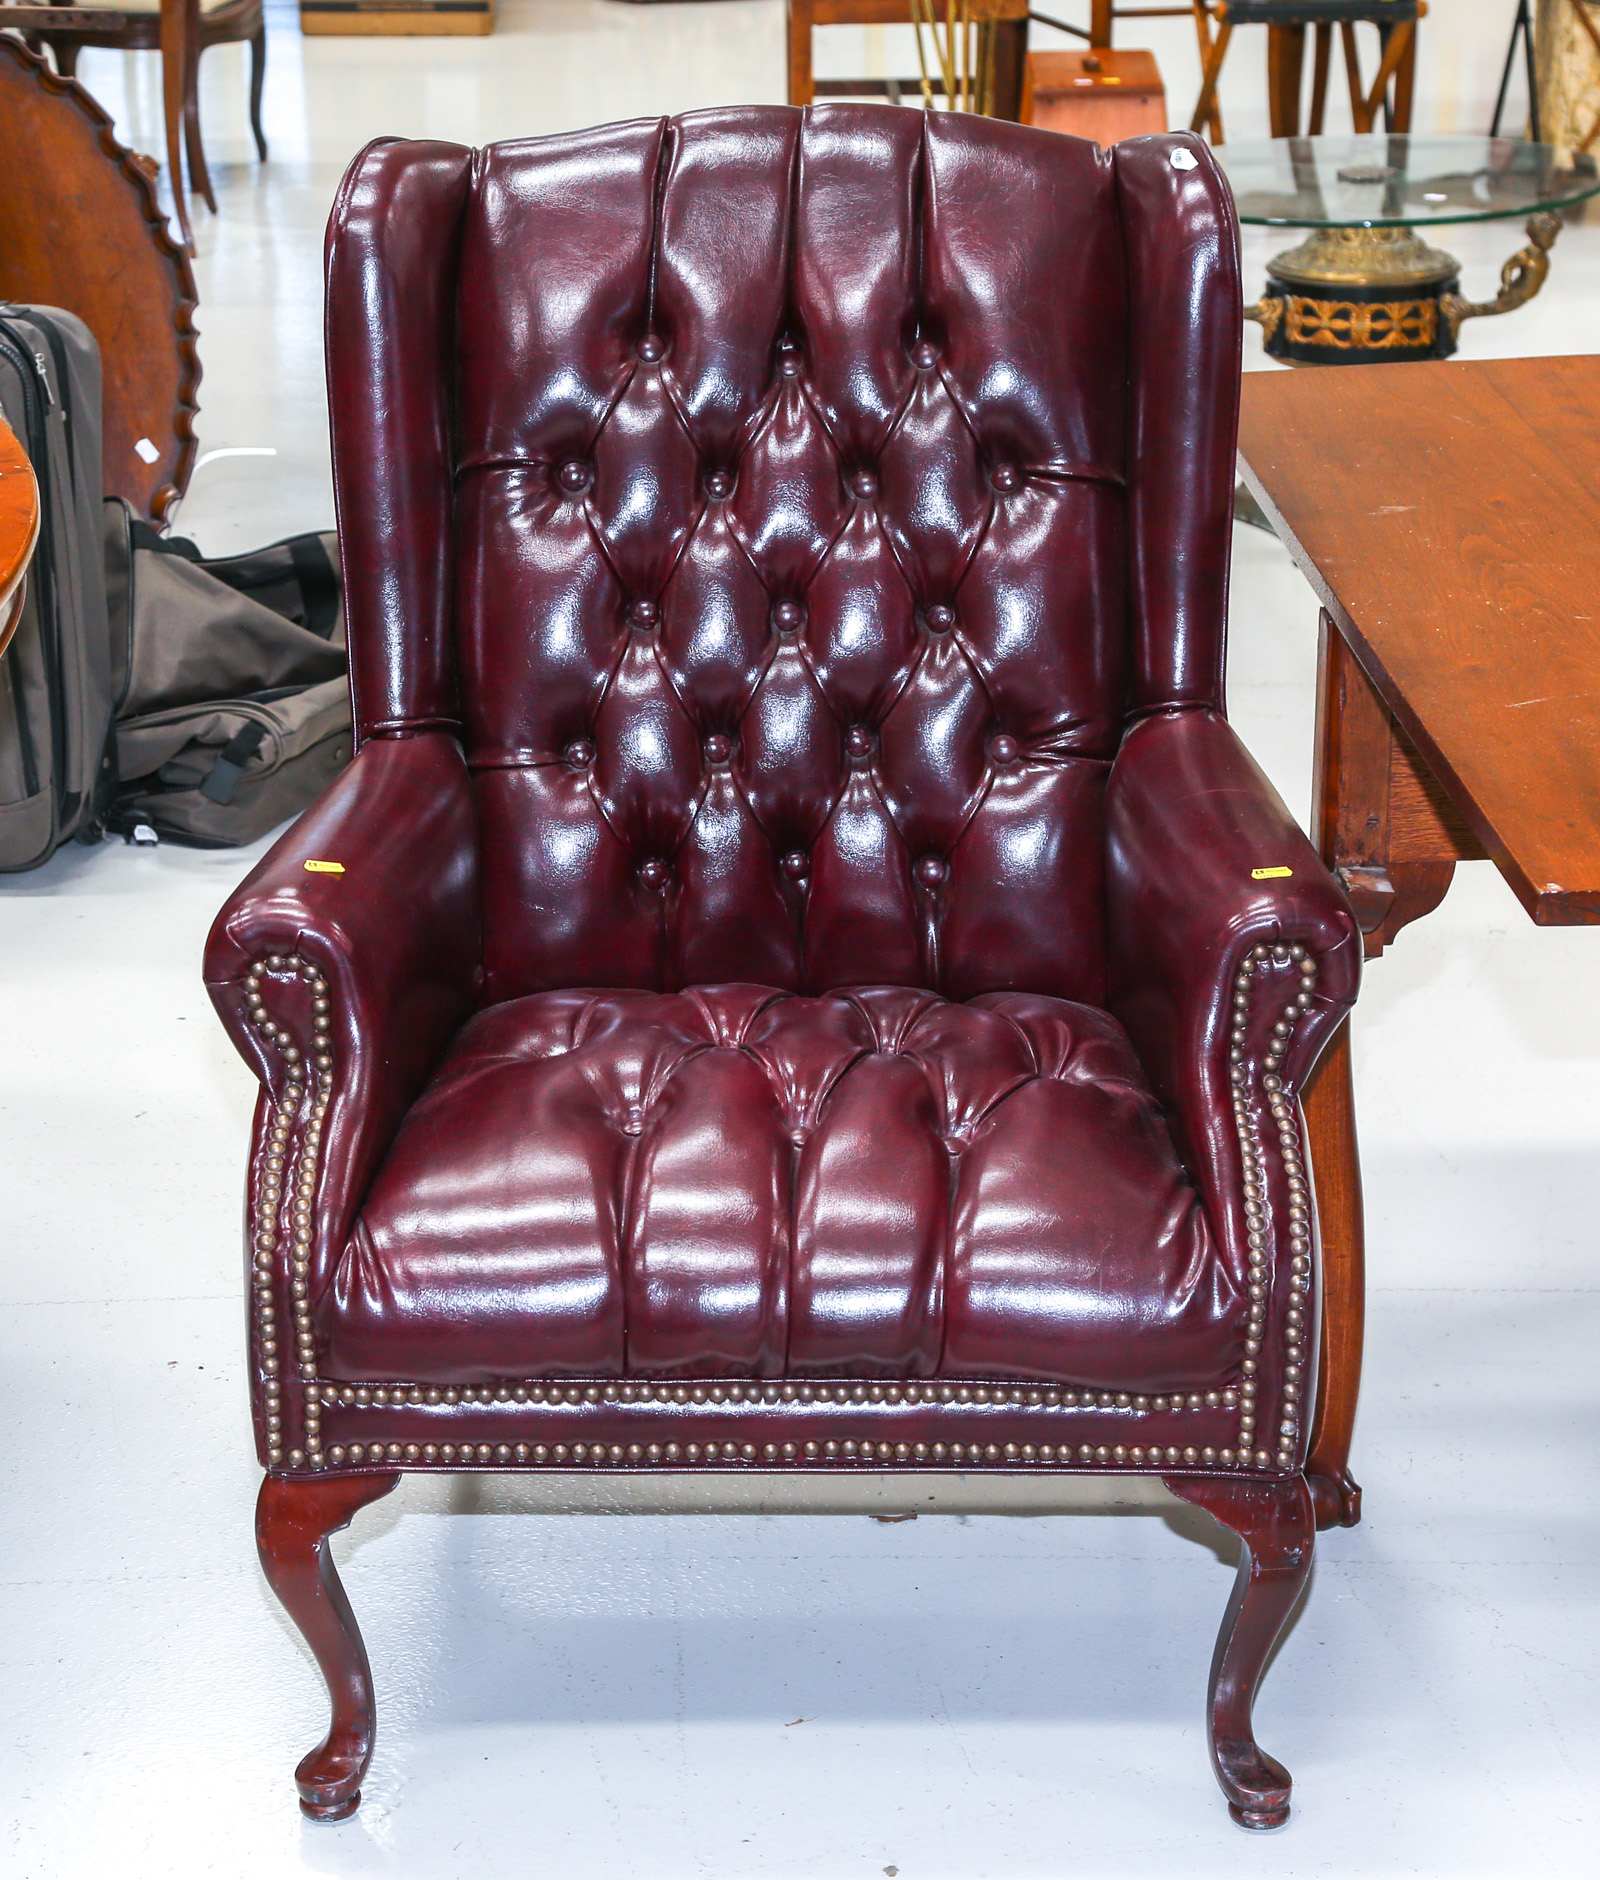 QUEEN ANNE STYLE WING CHAIR 3rd 2e8b41